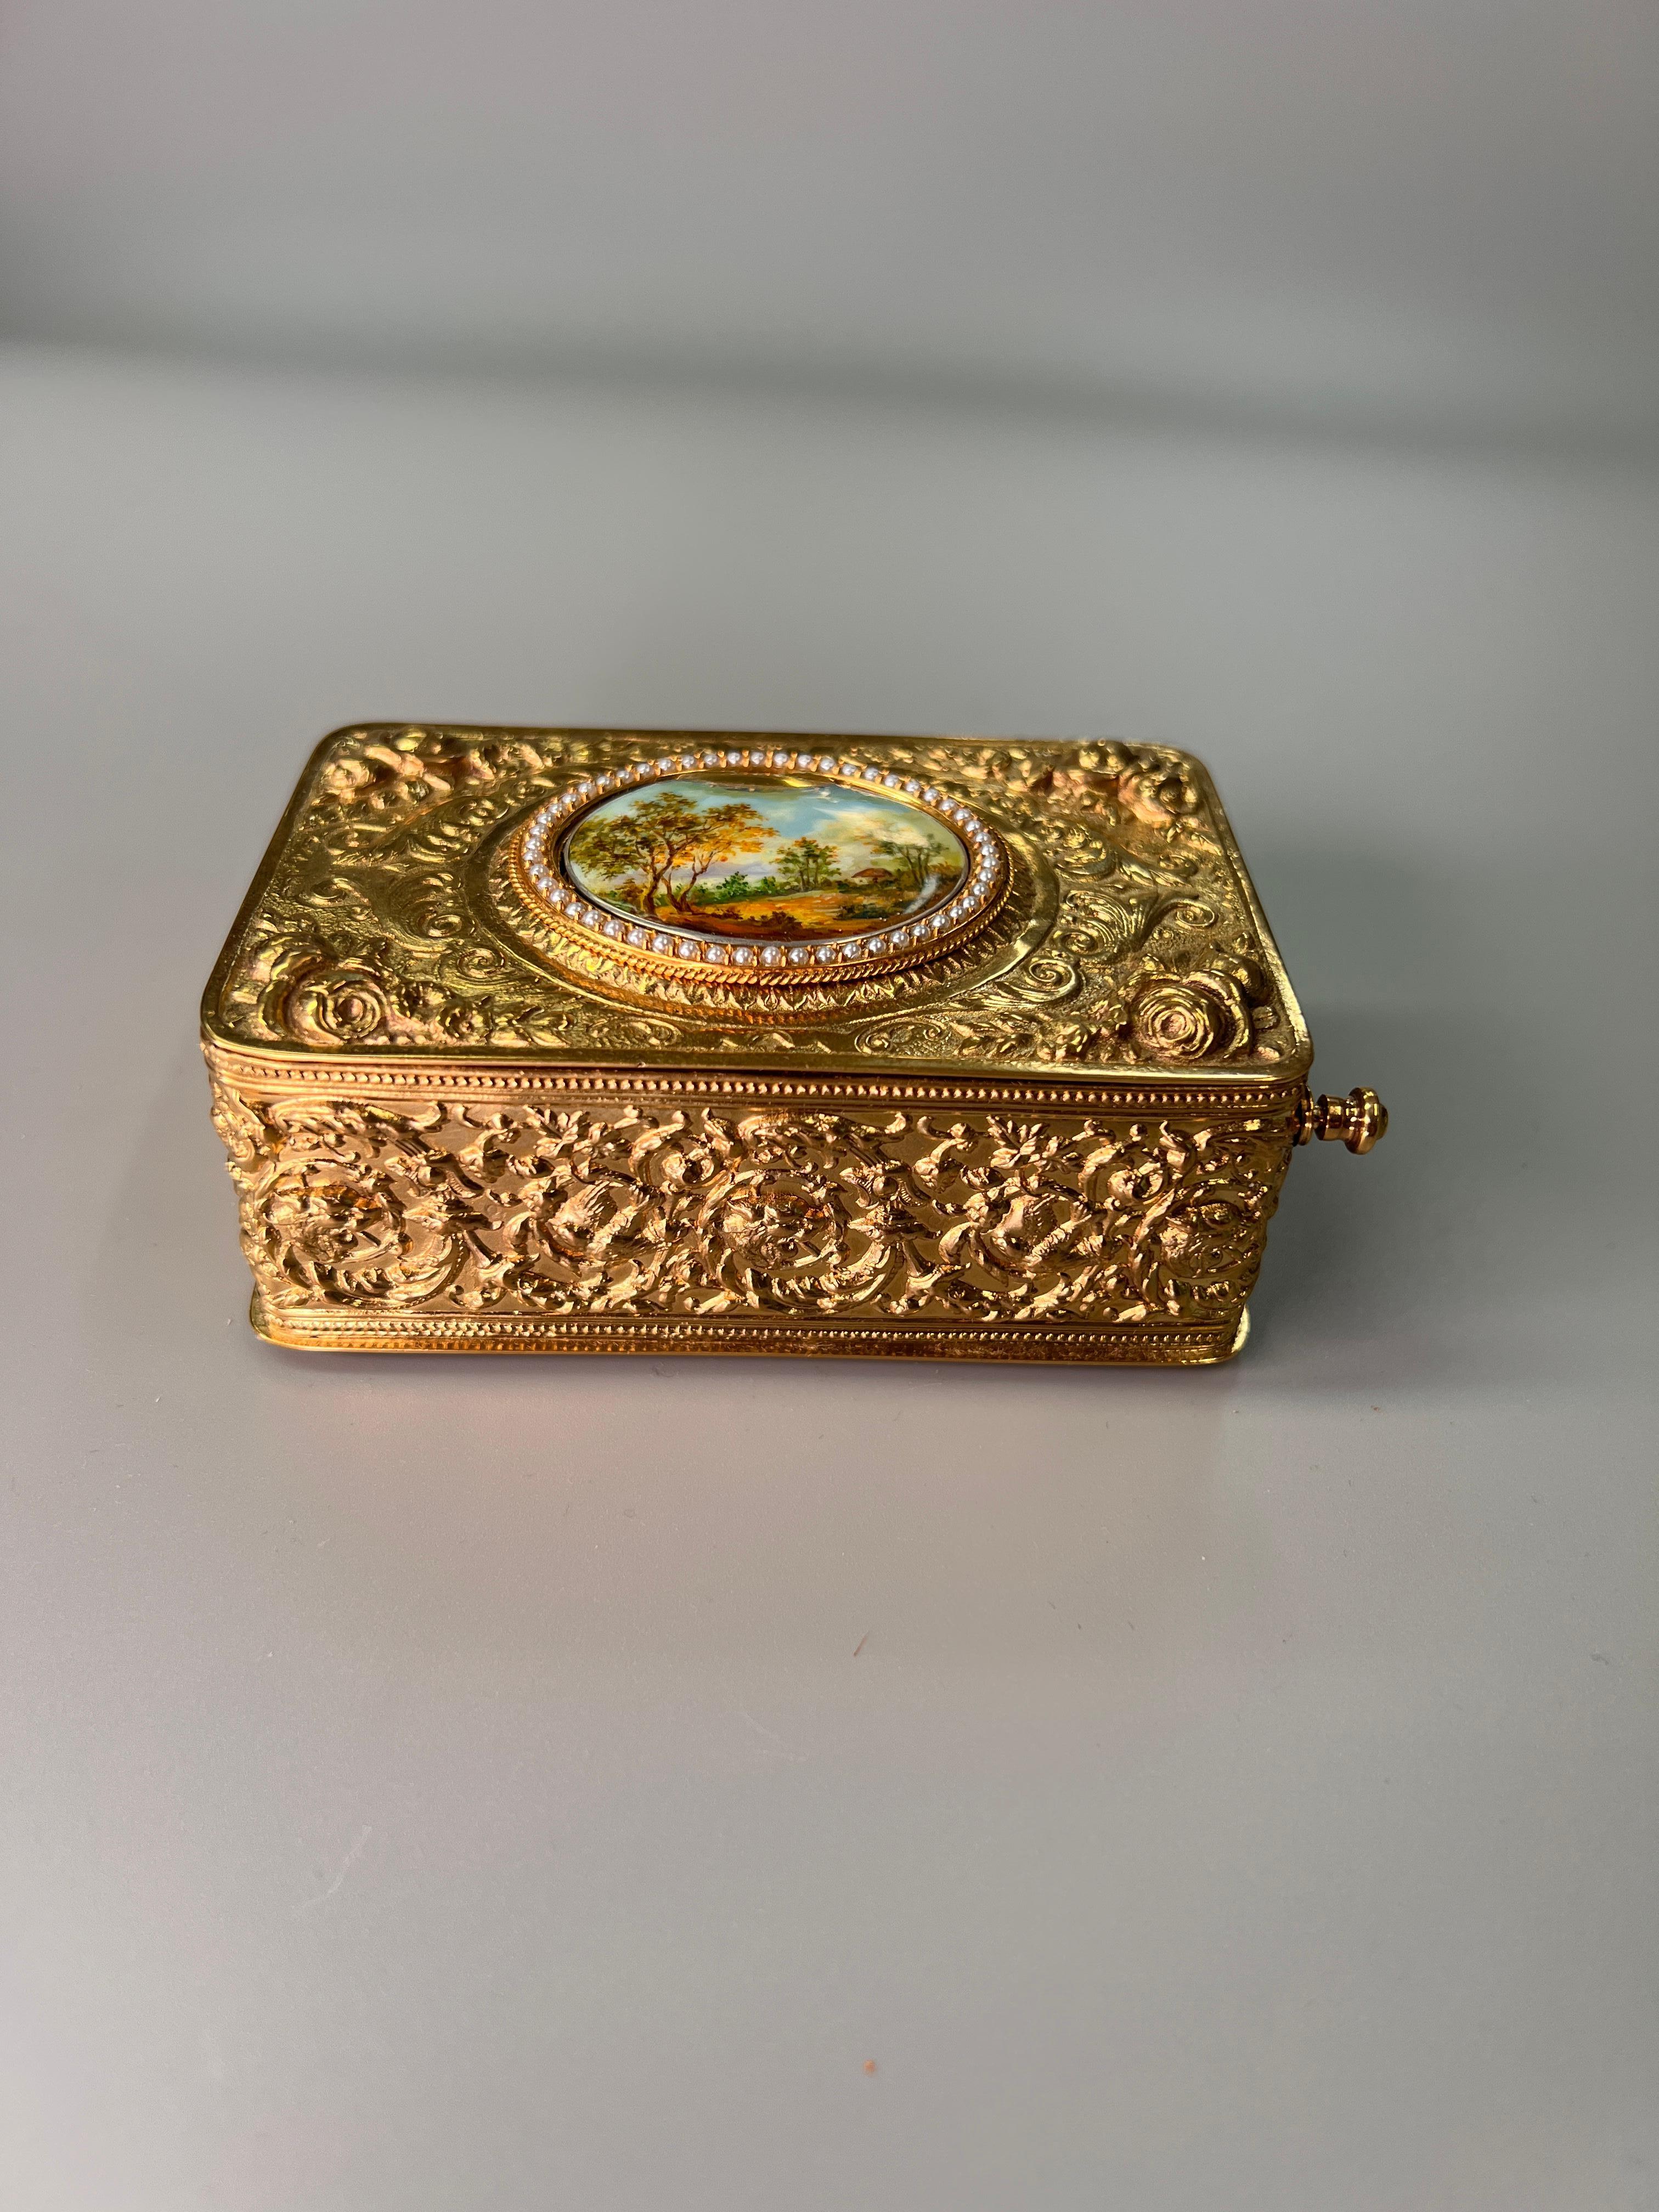 A stunning gilt bronze and seed pearl singing bird box by Bontems of Paris - CIRCA 1890.
The bird rises from beneath the enamal oval lid and is sure to delight! 

